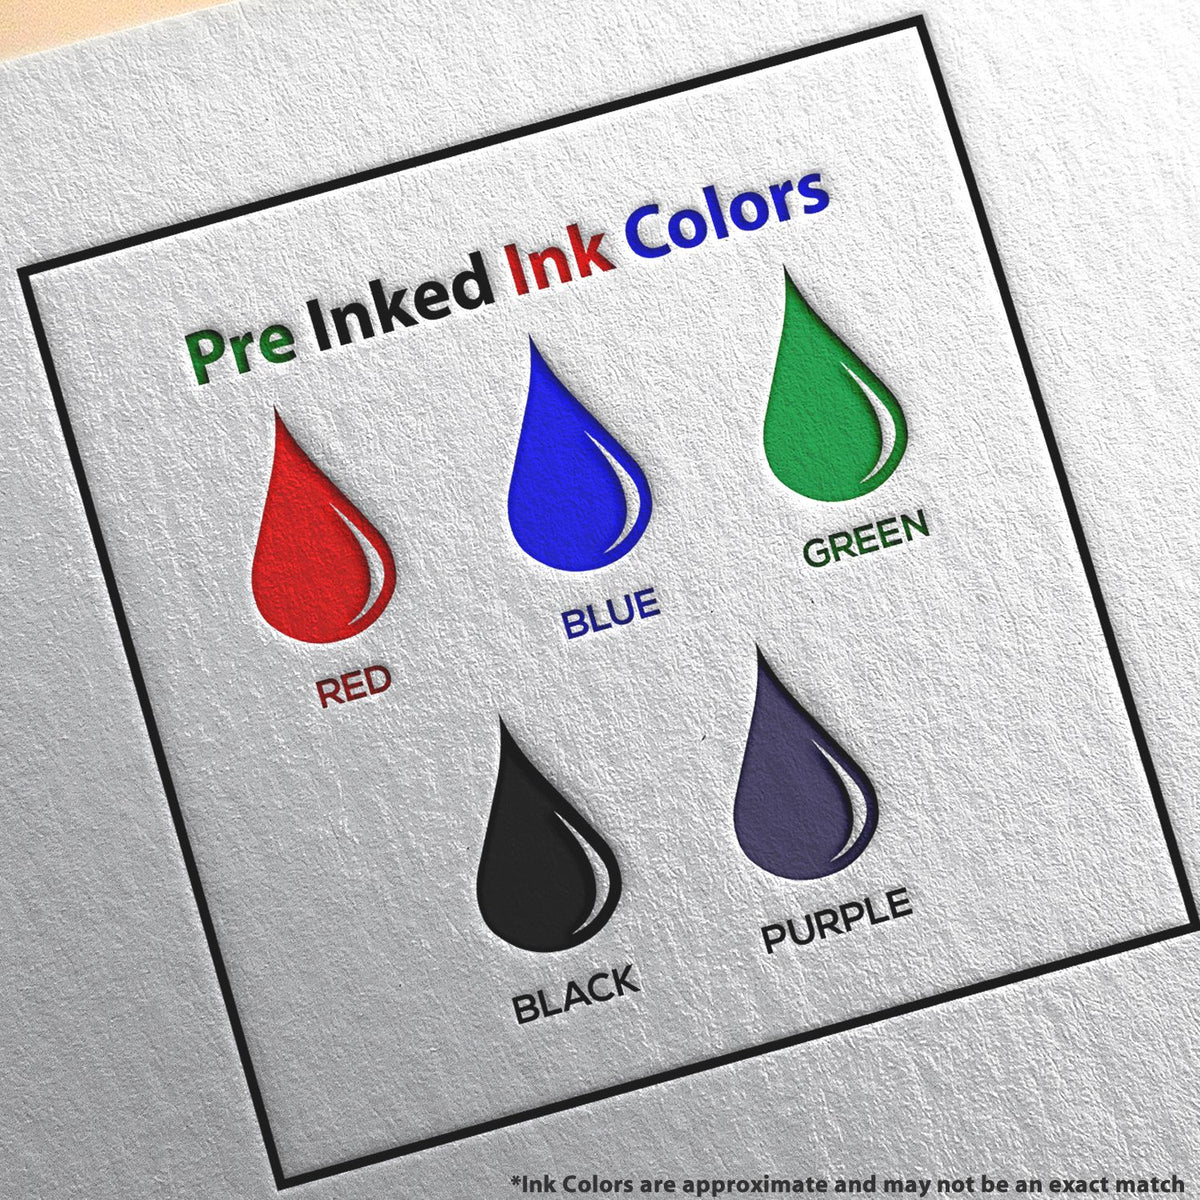 A picture showing the different ink colors or hues available for the Slim Pre-Inked Delaware Architect Seal Stamp product.